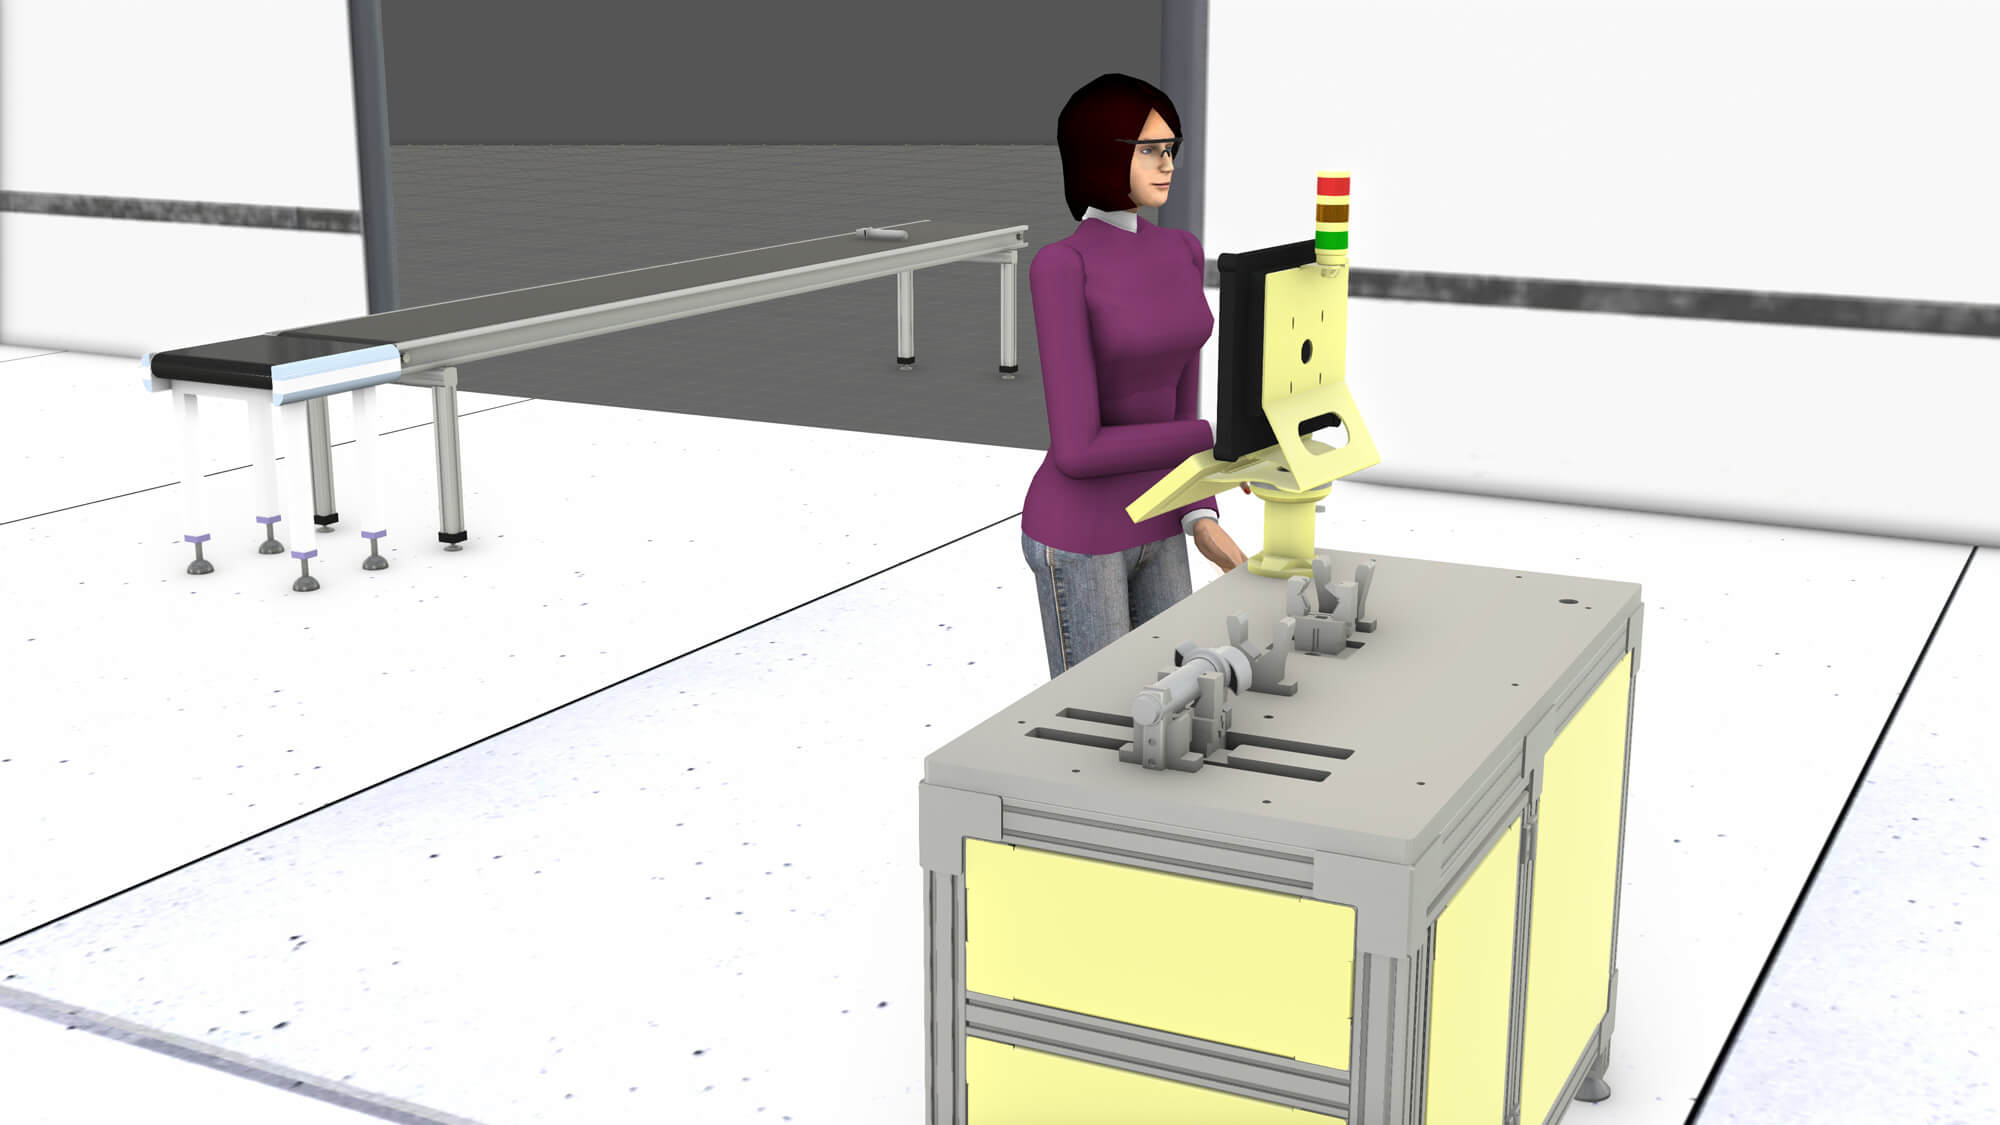 Simulation of a person programming at a production line